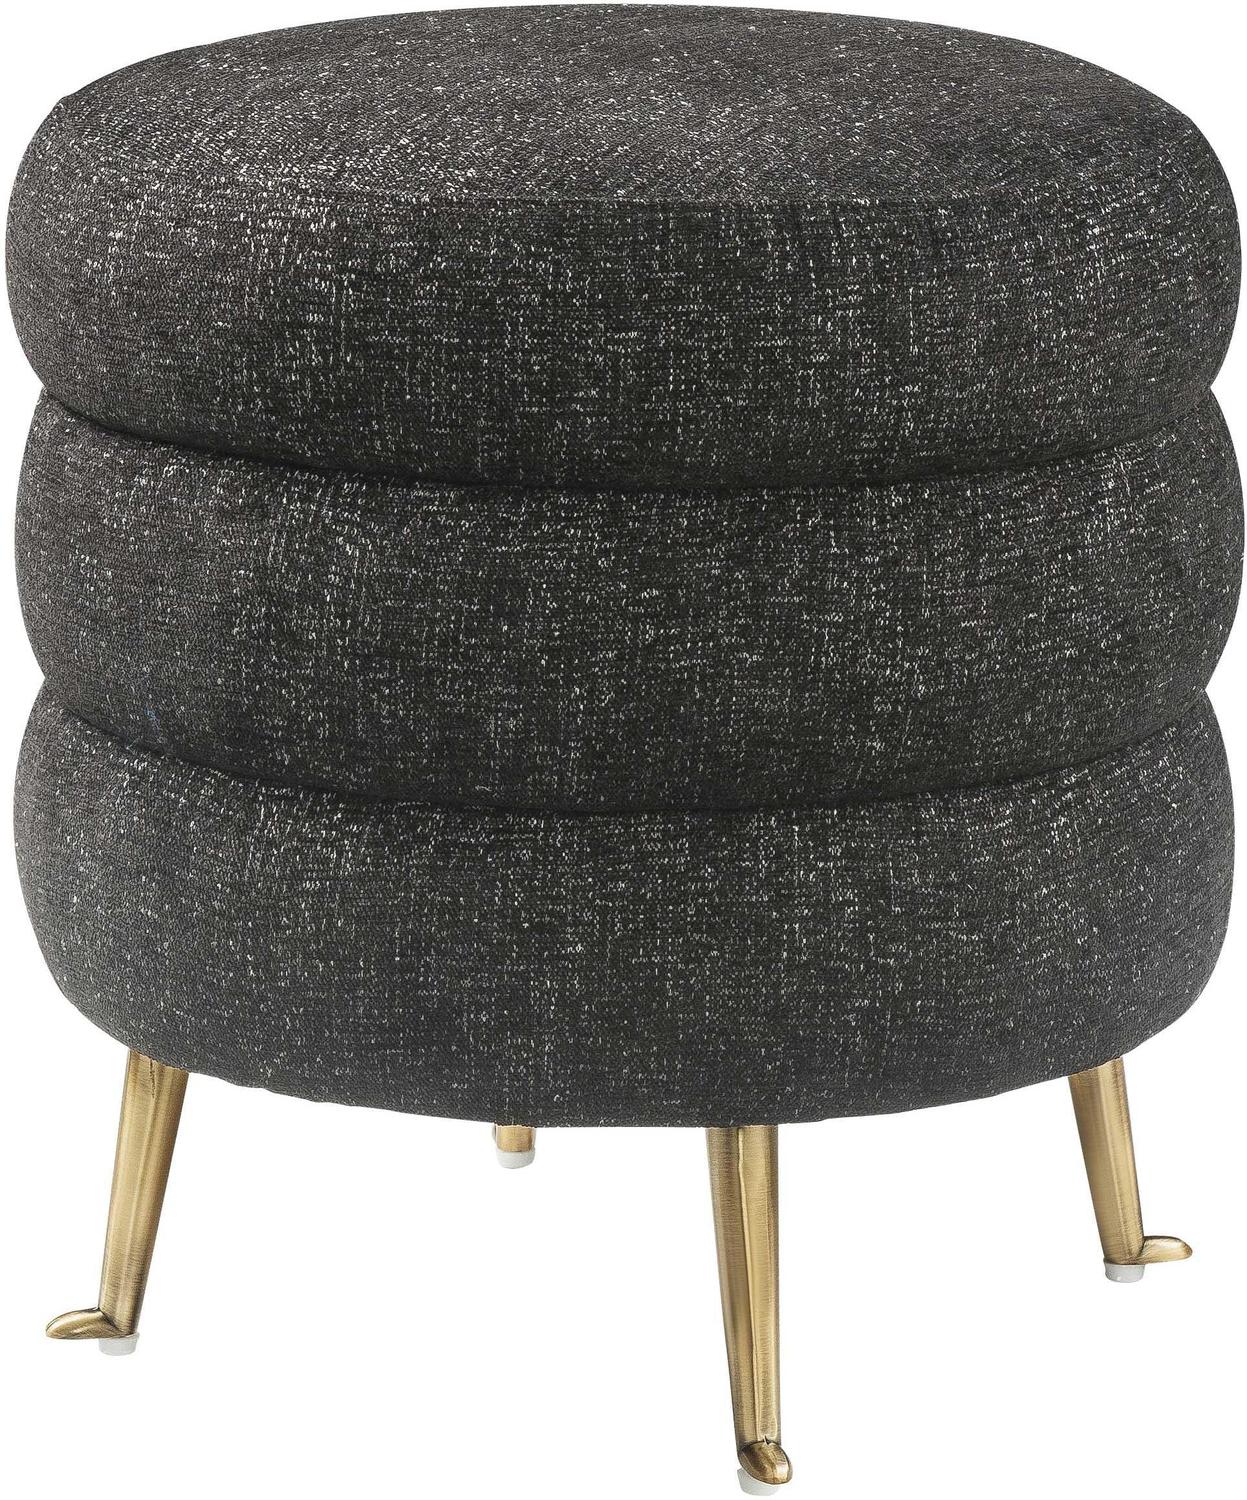 accent chair upholstered chairs Tov Furniture Ottomans Black